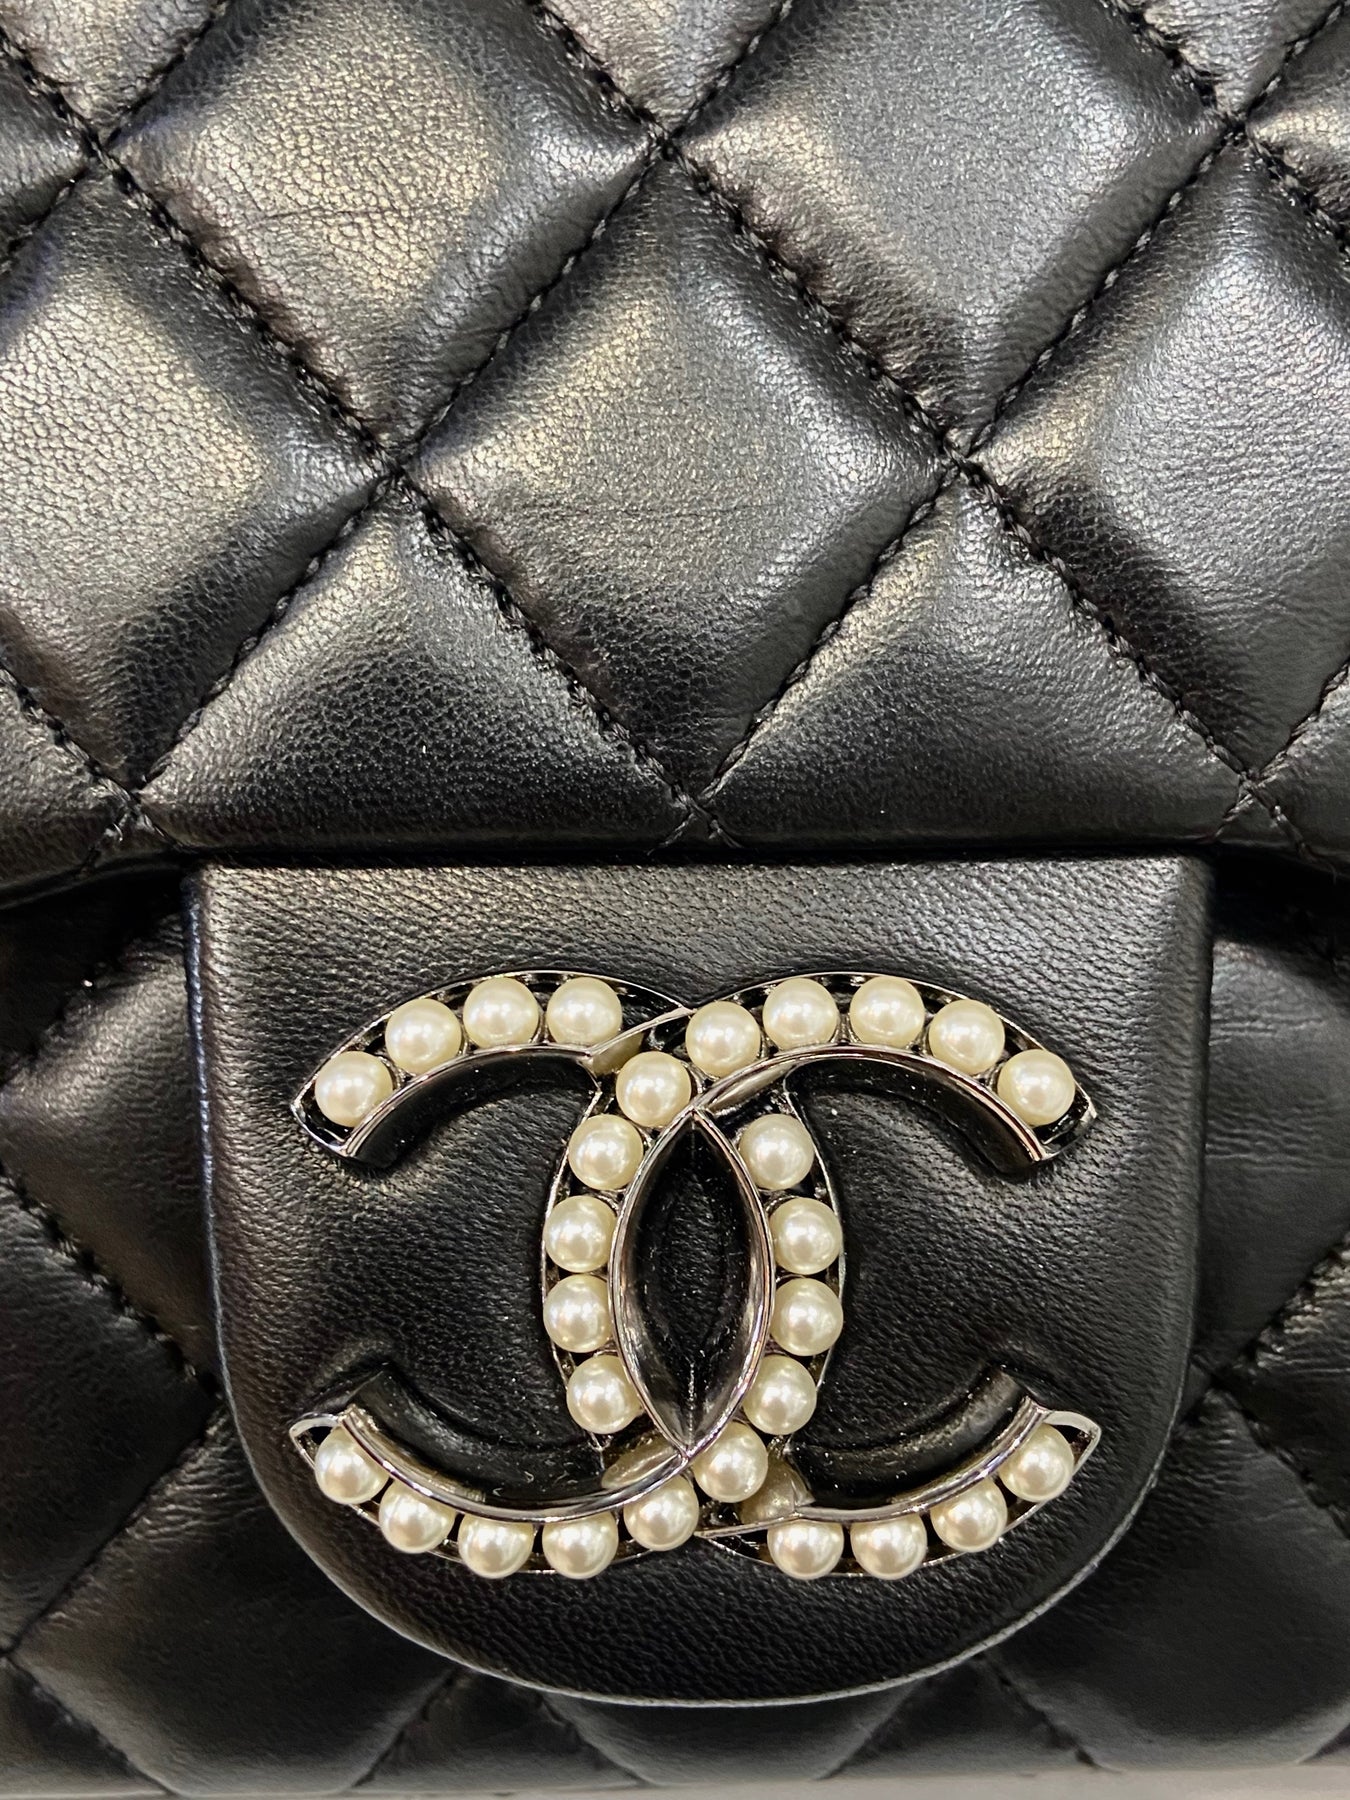 Authentic Chanel Black Lambskin Westminster Pearl Flap Bag Article: A94305  Y09157 Made in France, Accessorising - Brand Name / Designer Handbags For  Carry & We…